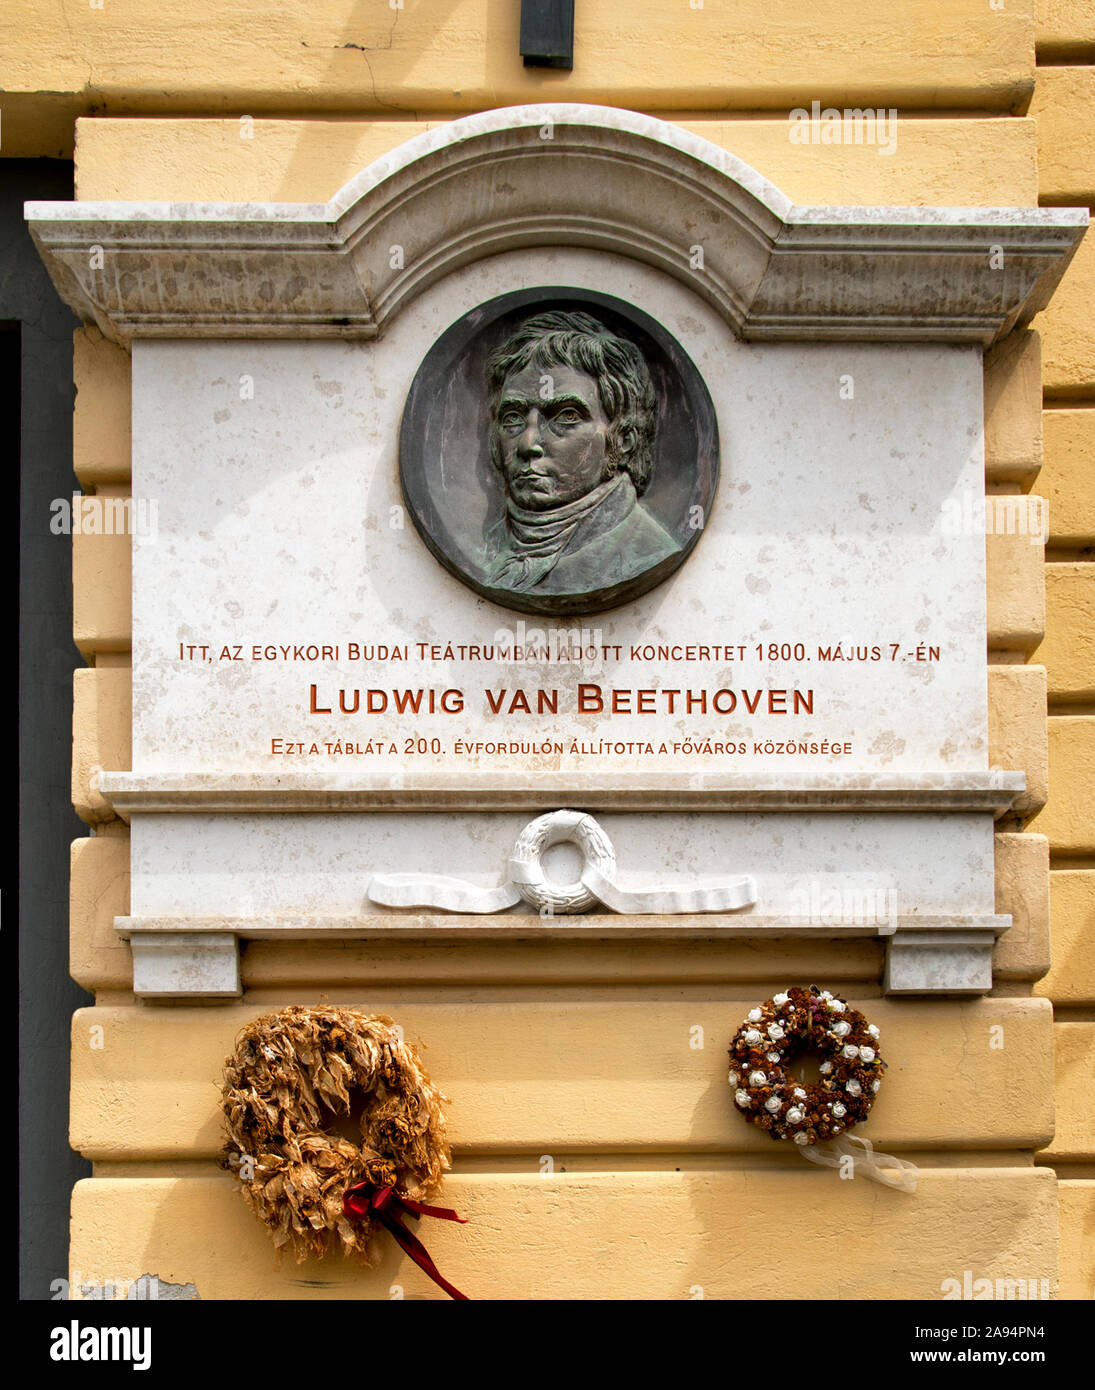 Plaque commemorating  a concert by Ludwig van Beethoven in Budapest, Hungary. Photograph clearly shows details of the Beethoven portrait. Stock Photo